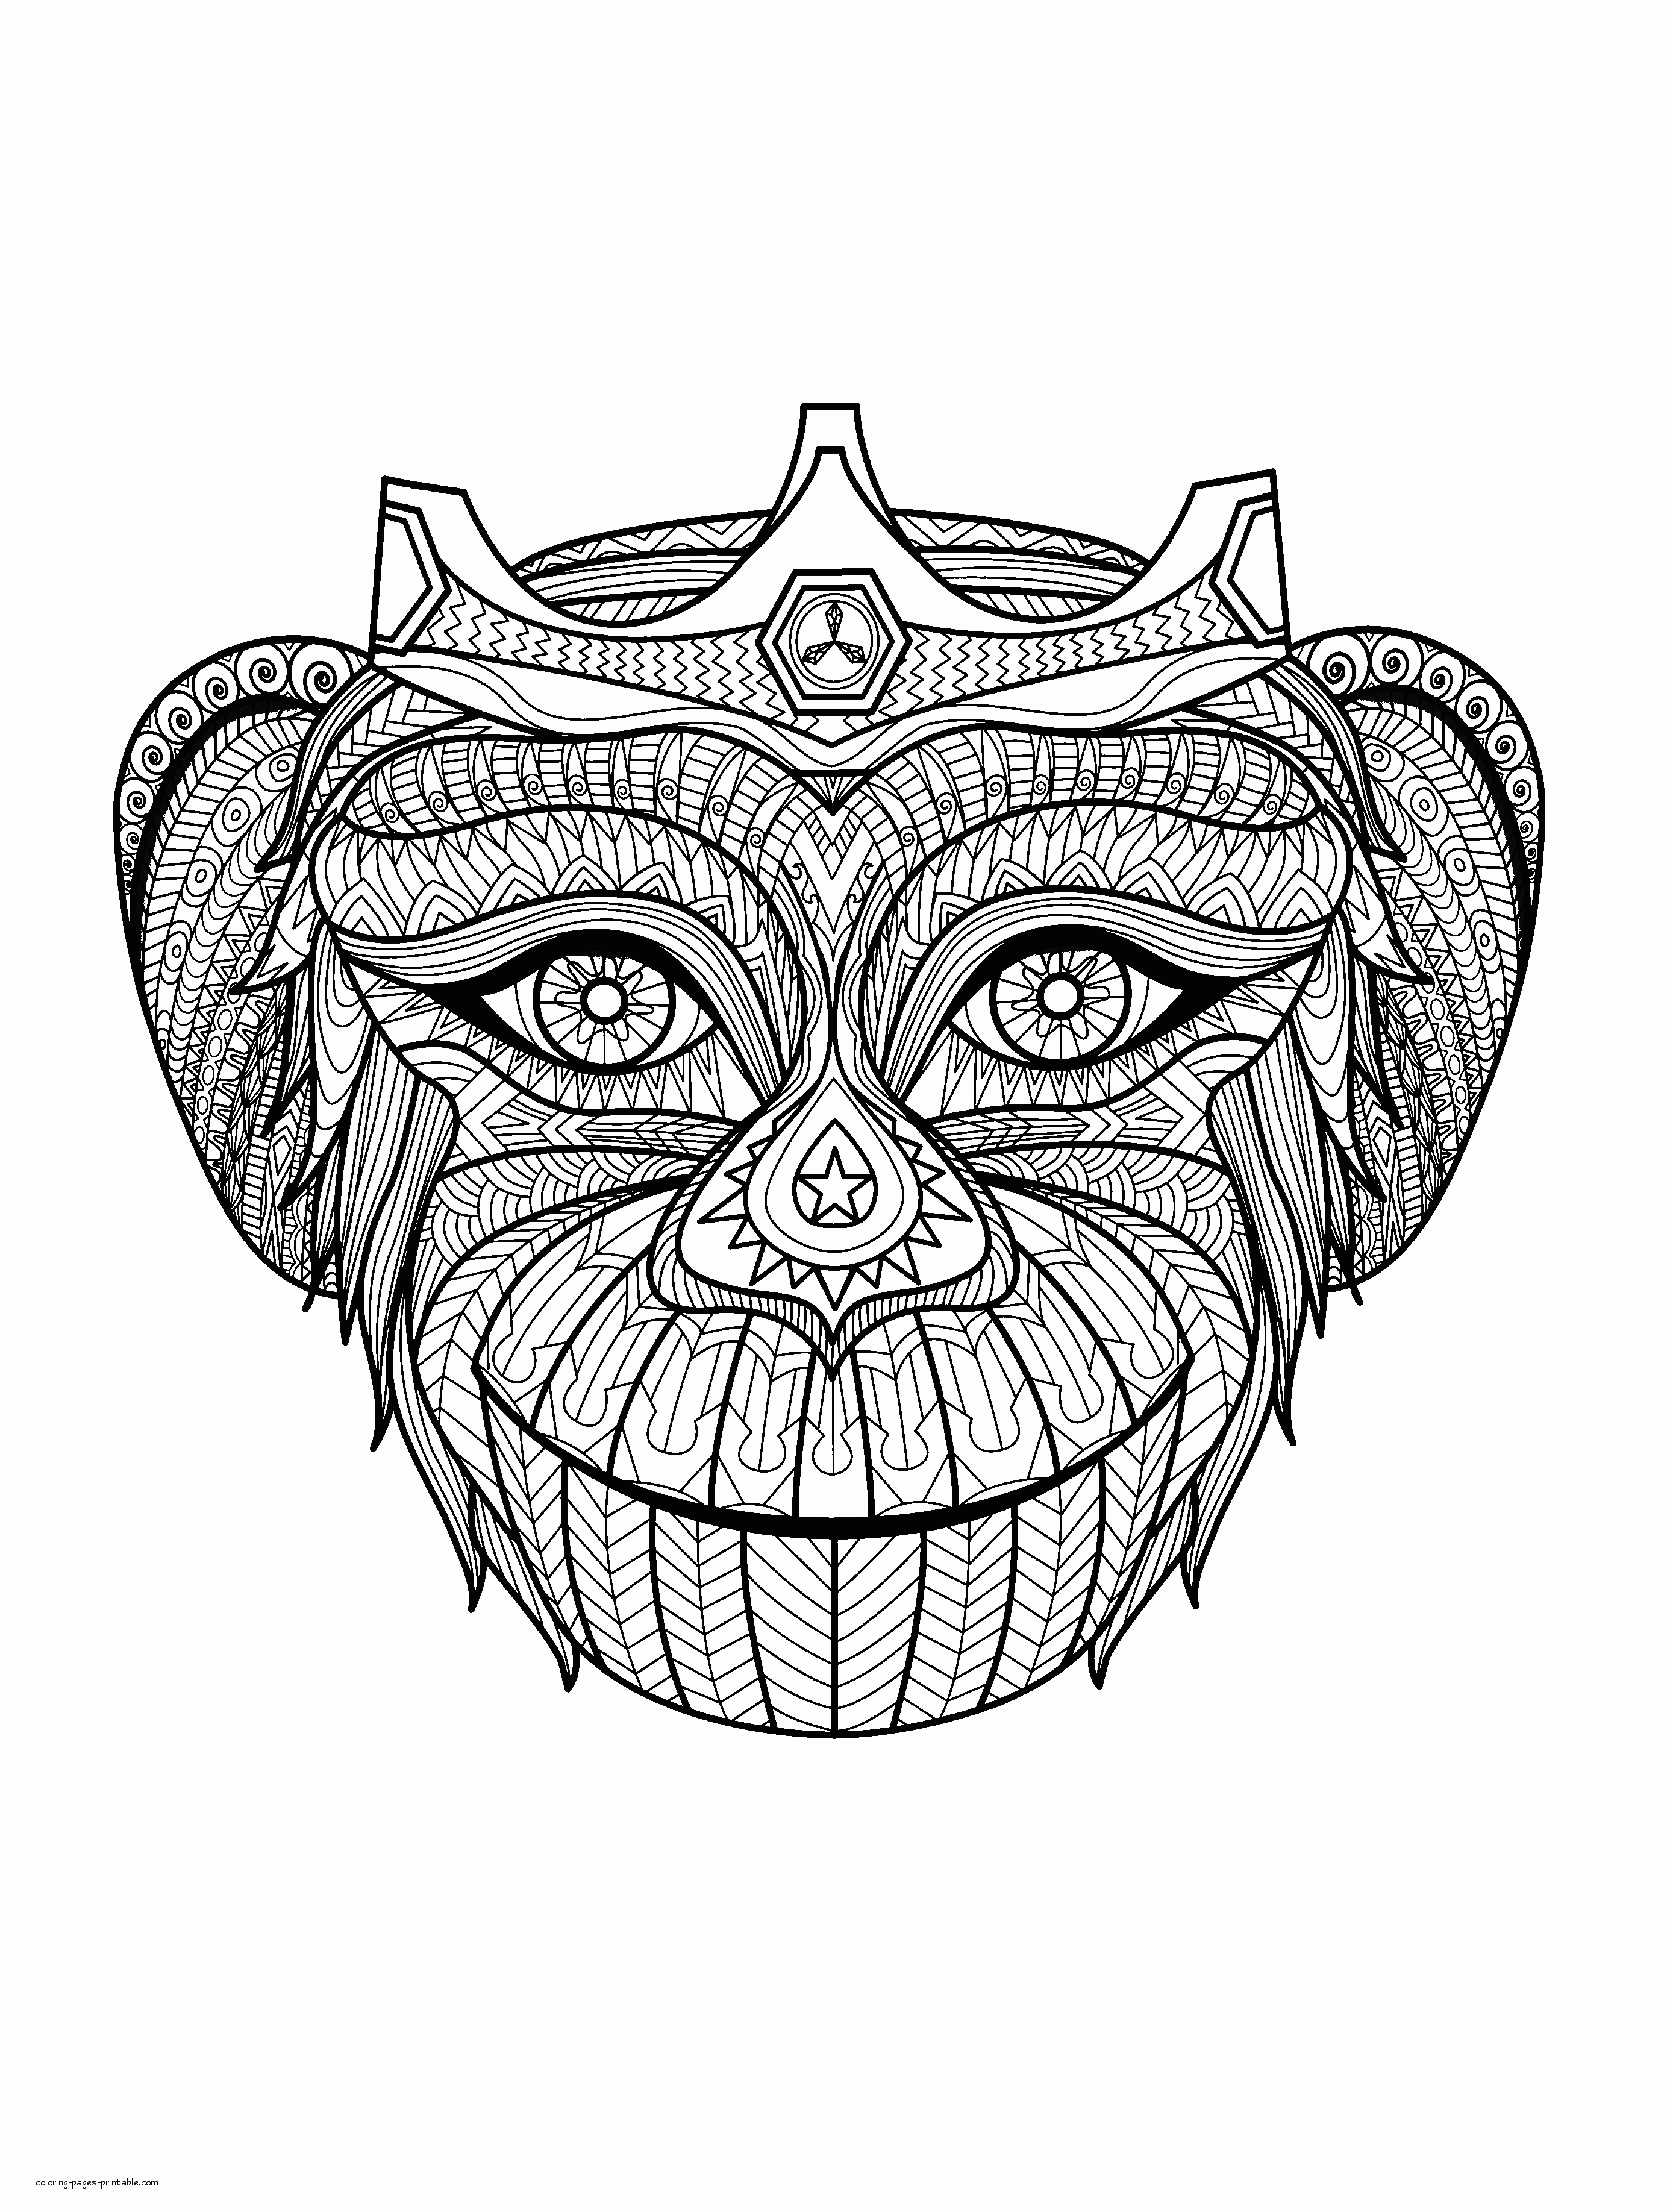 Monkey Face Coloring Page For Adults. Wild Animals